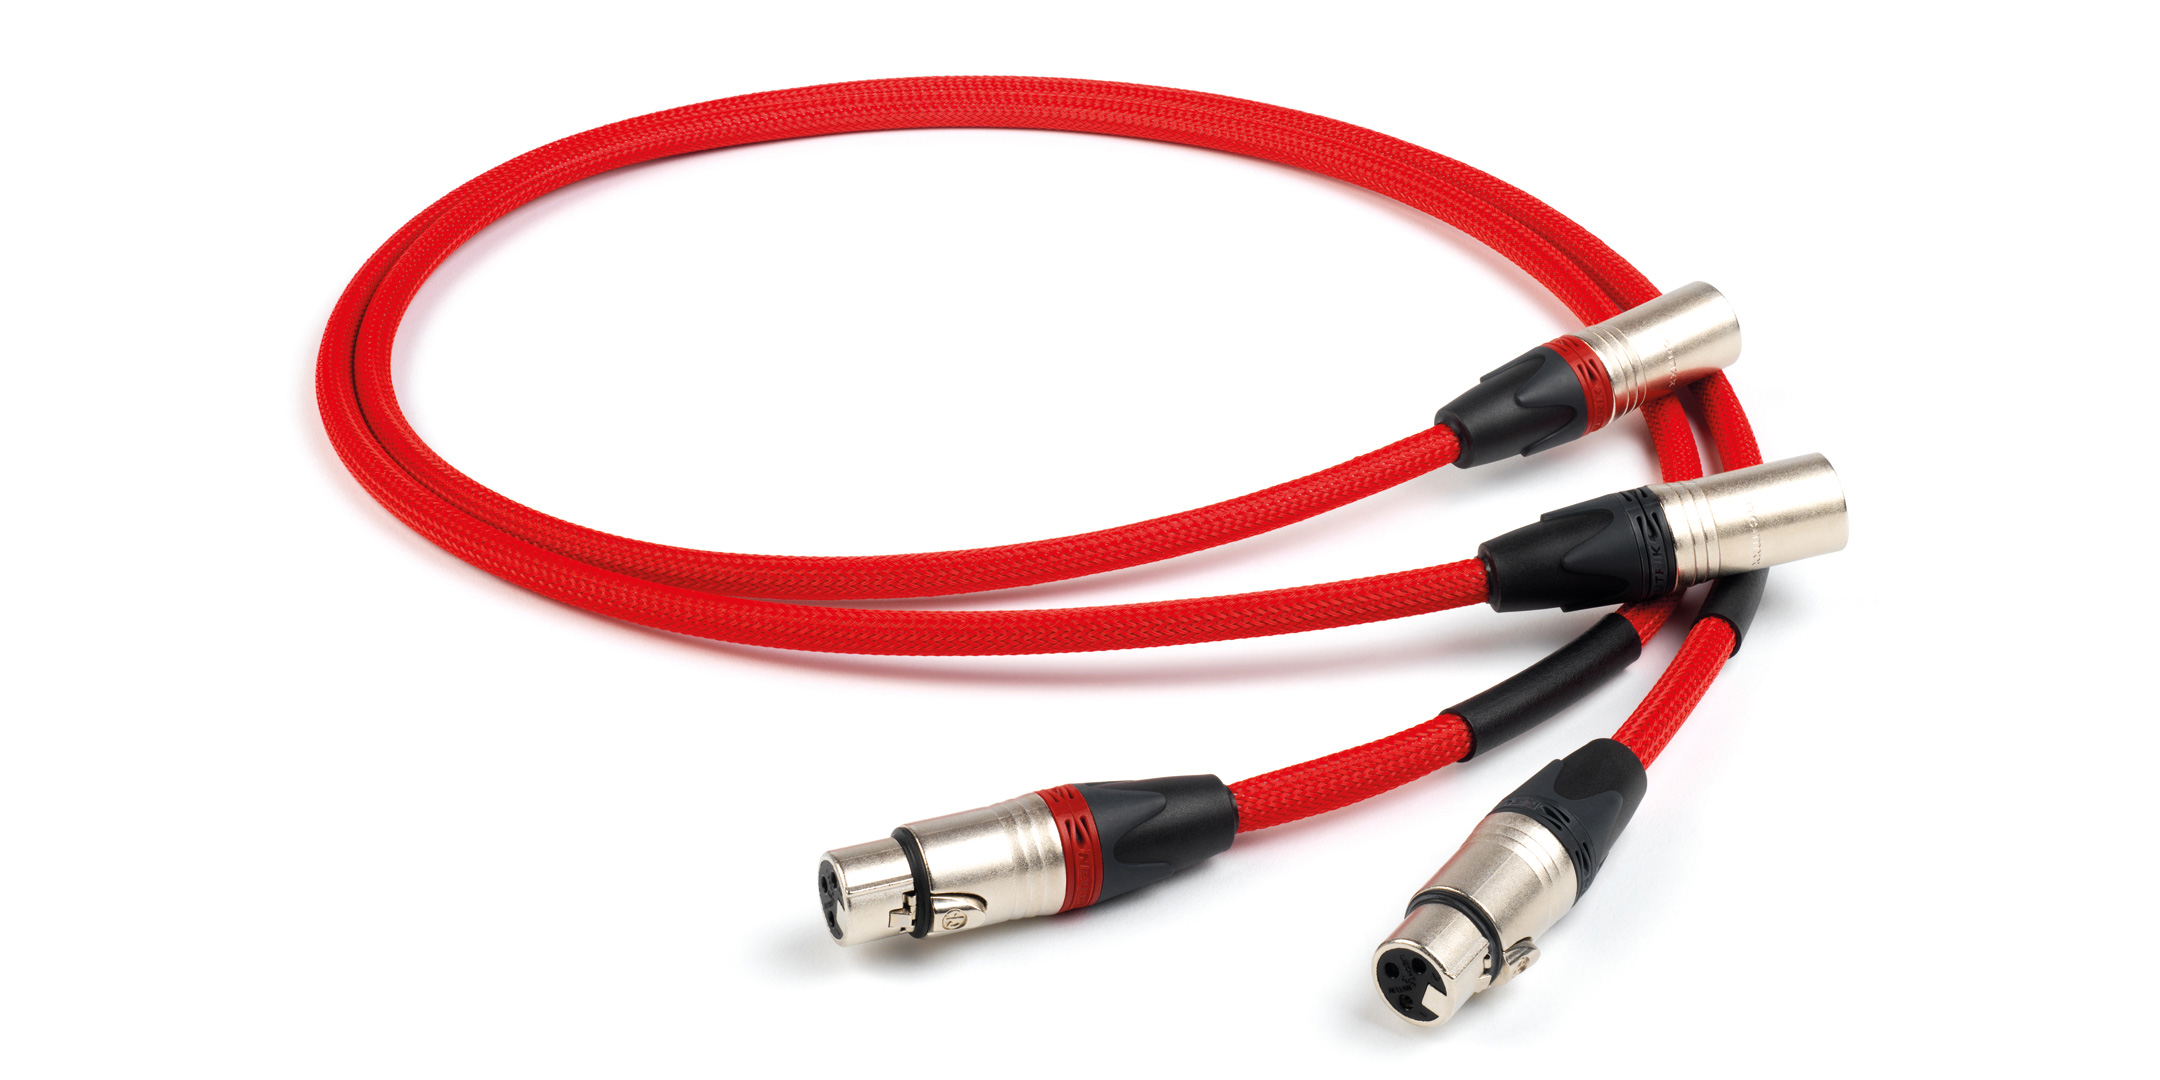 Pic showing a pair of Chord Shawline XLR connectors